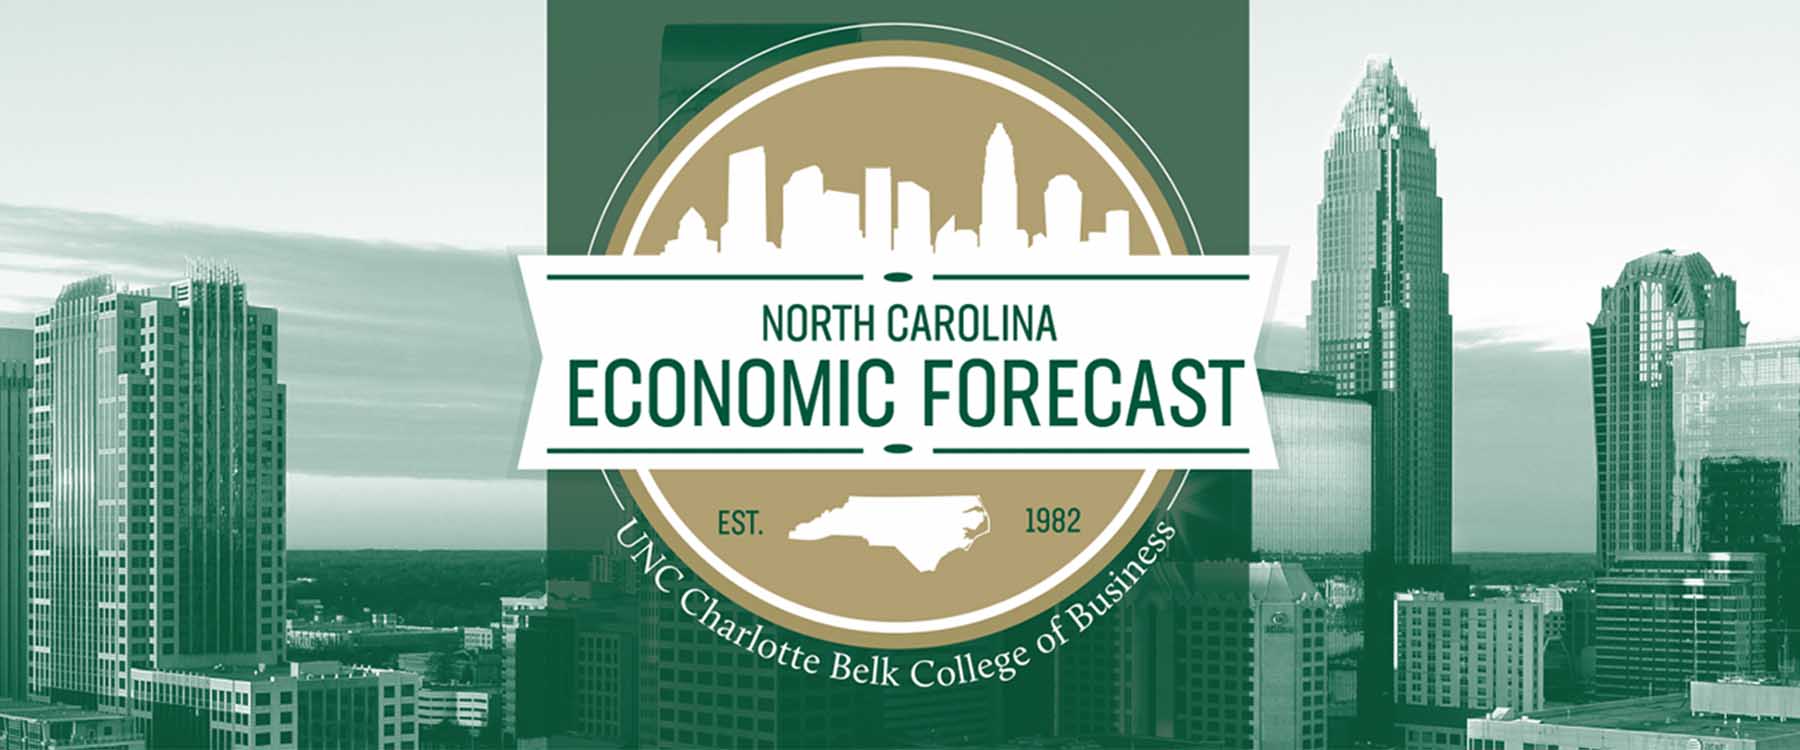 nflation continues to create uncertainty in North Carolina and across the country, with economic conditions shaping up for a potential recession in 2023, according to John Connaughton, director of the North Carolina Economic Forecast. 